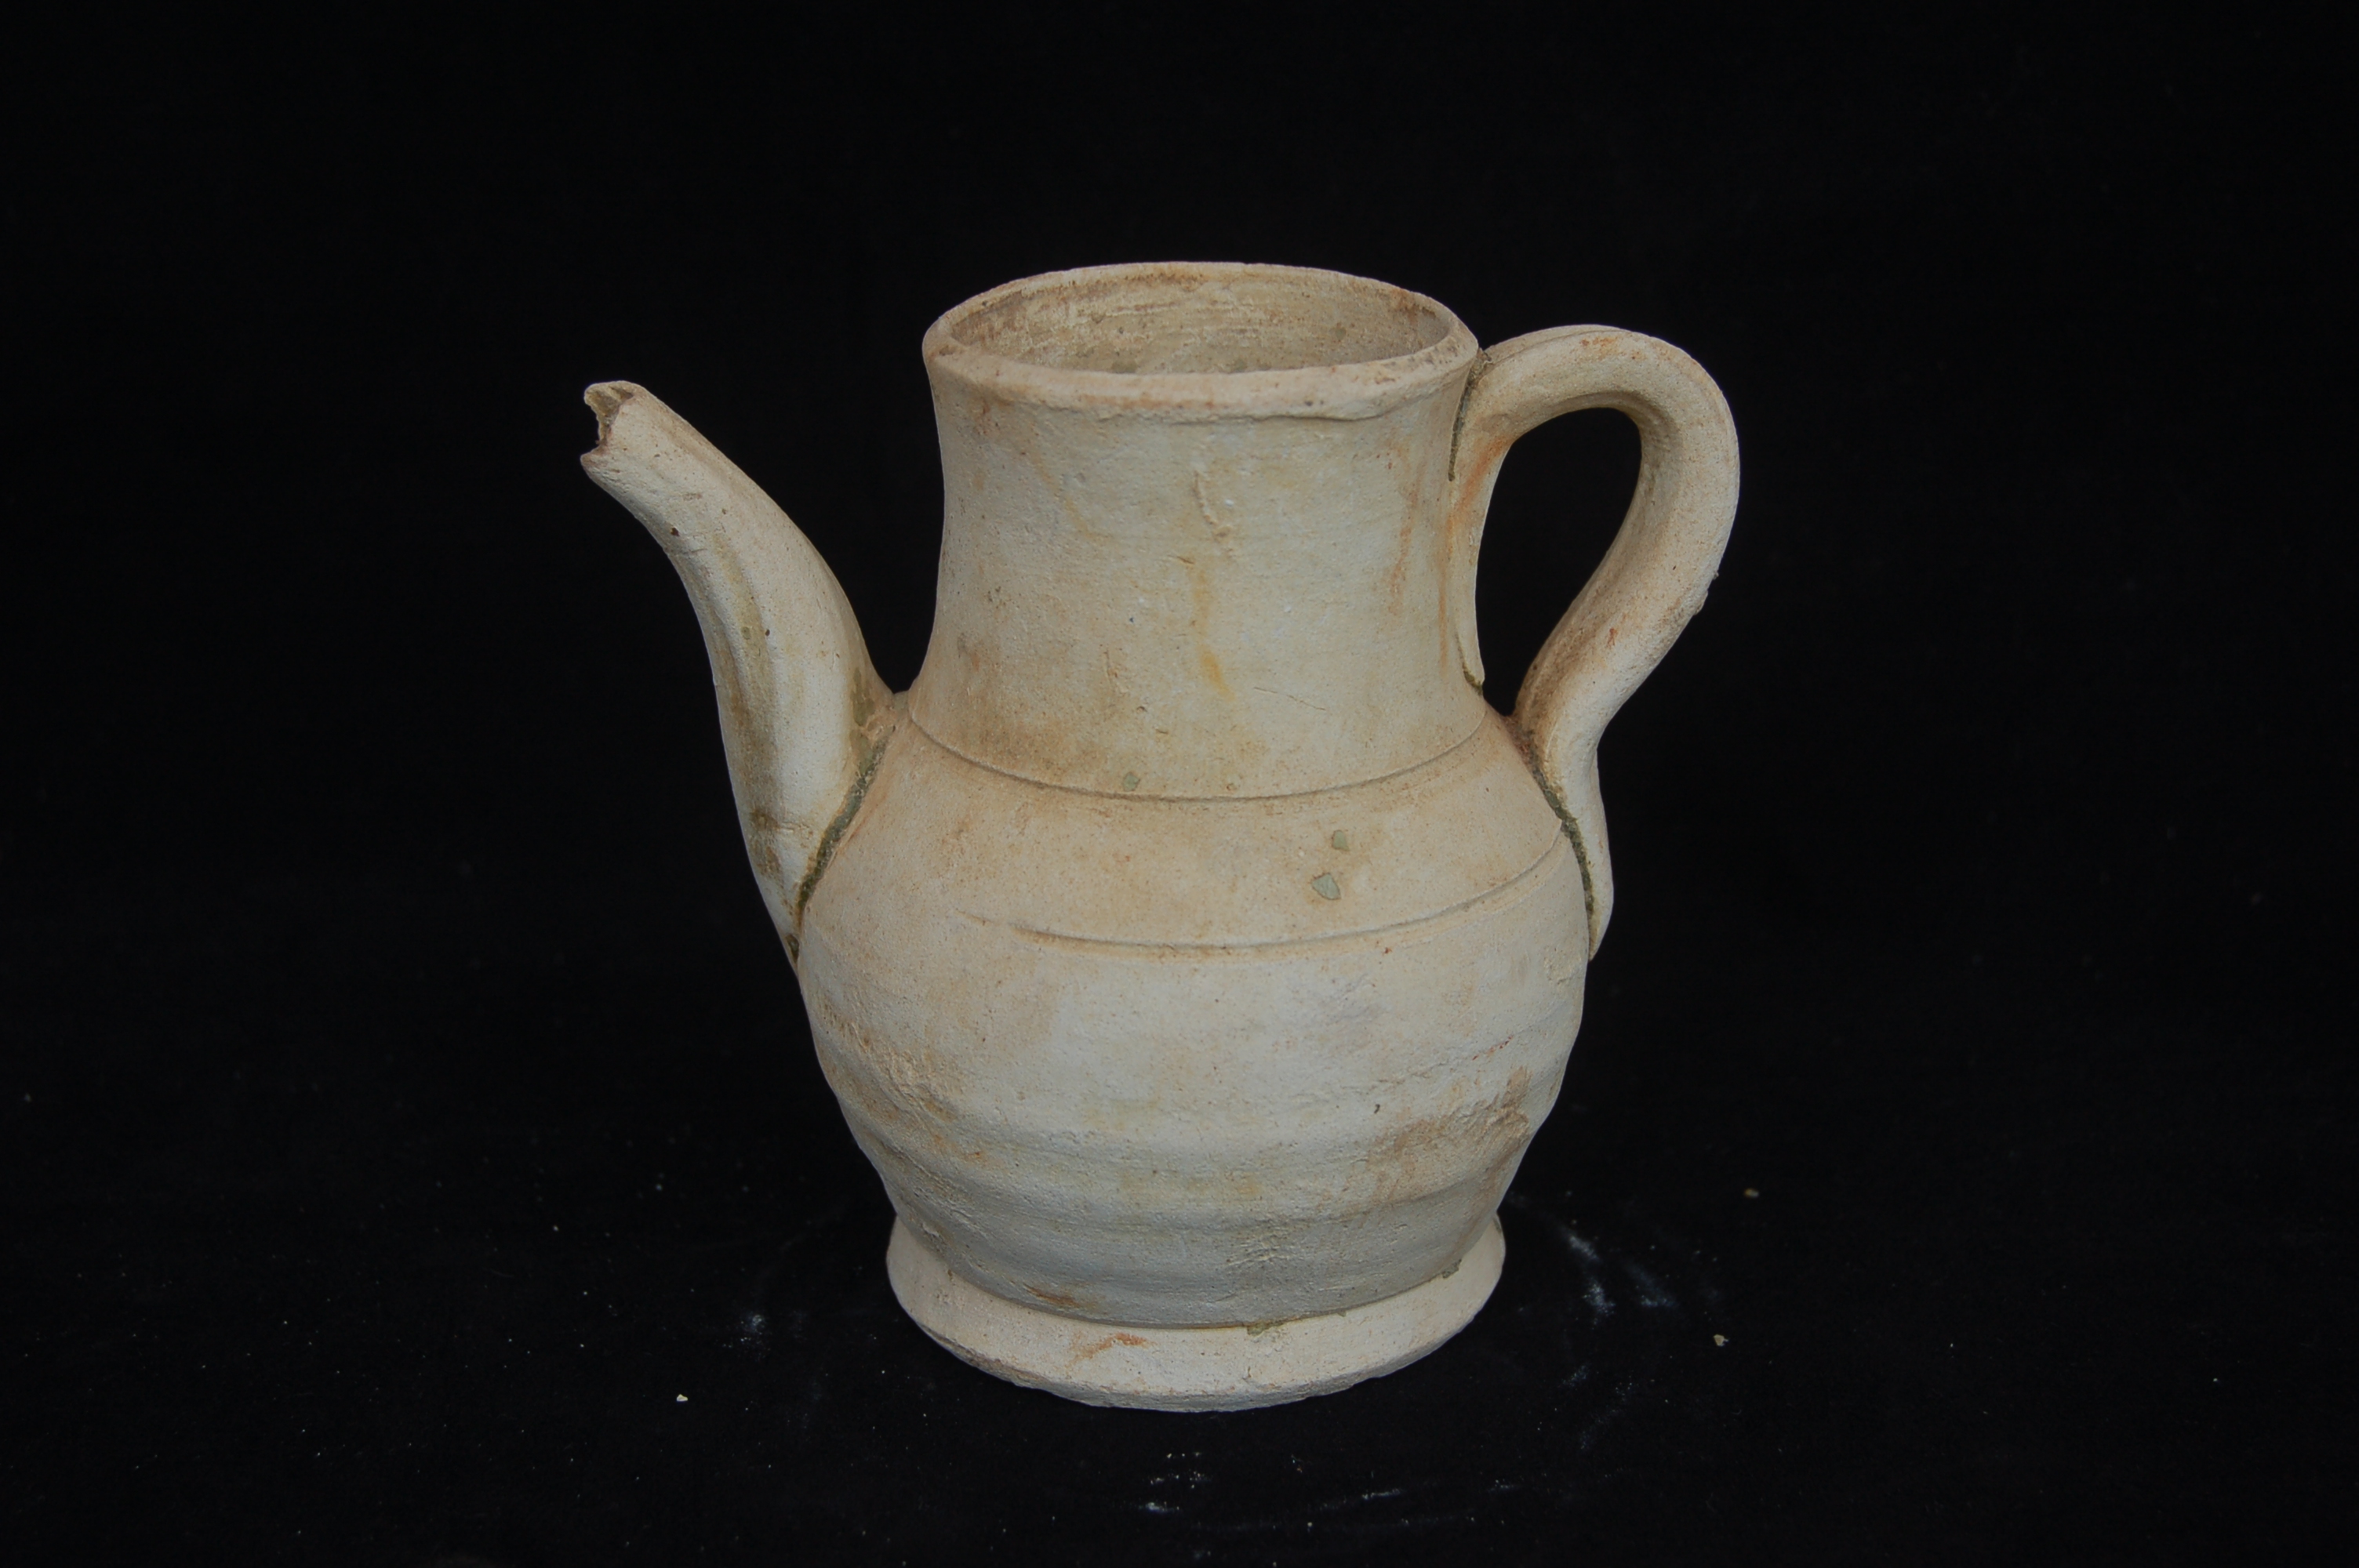 Small ewer with a wide straight neck, curved spout and strap handle. The foot is flared with a flat base. Diameter 9 cm, height 12 cm.